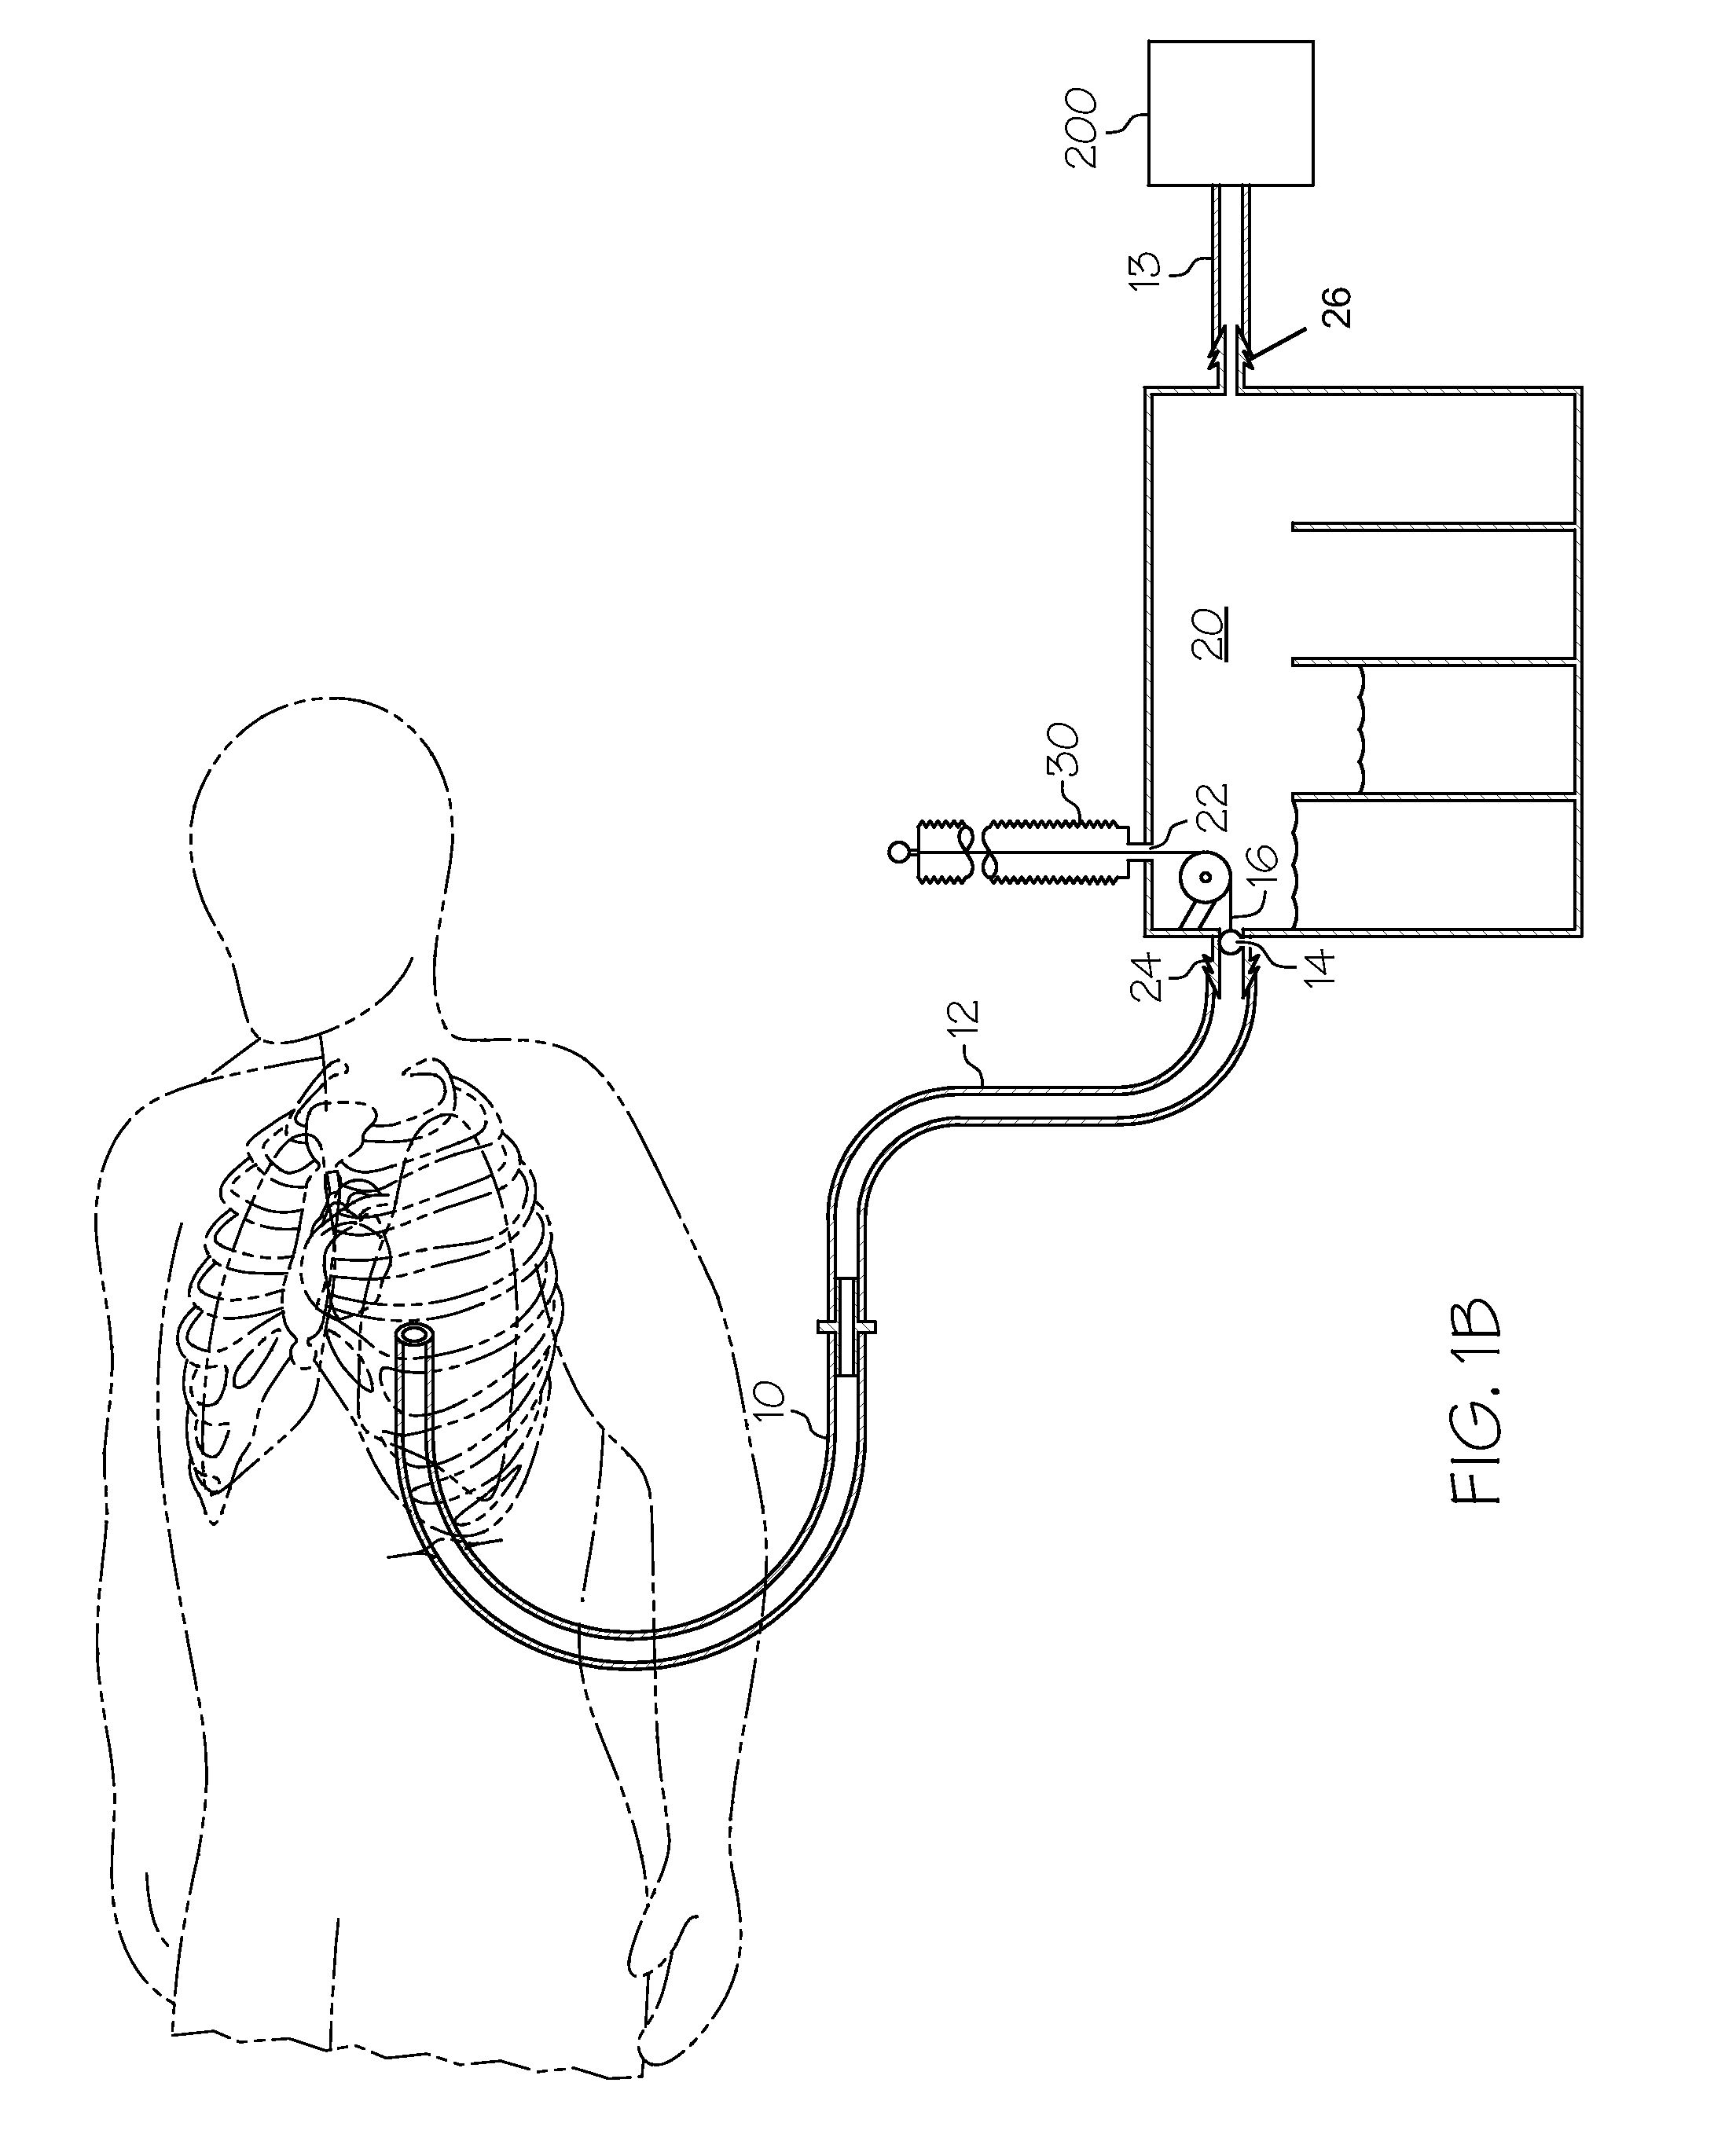 Methods and devices to clear obstructions from medical tubes